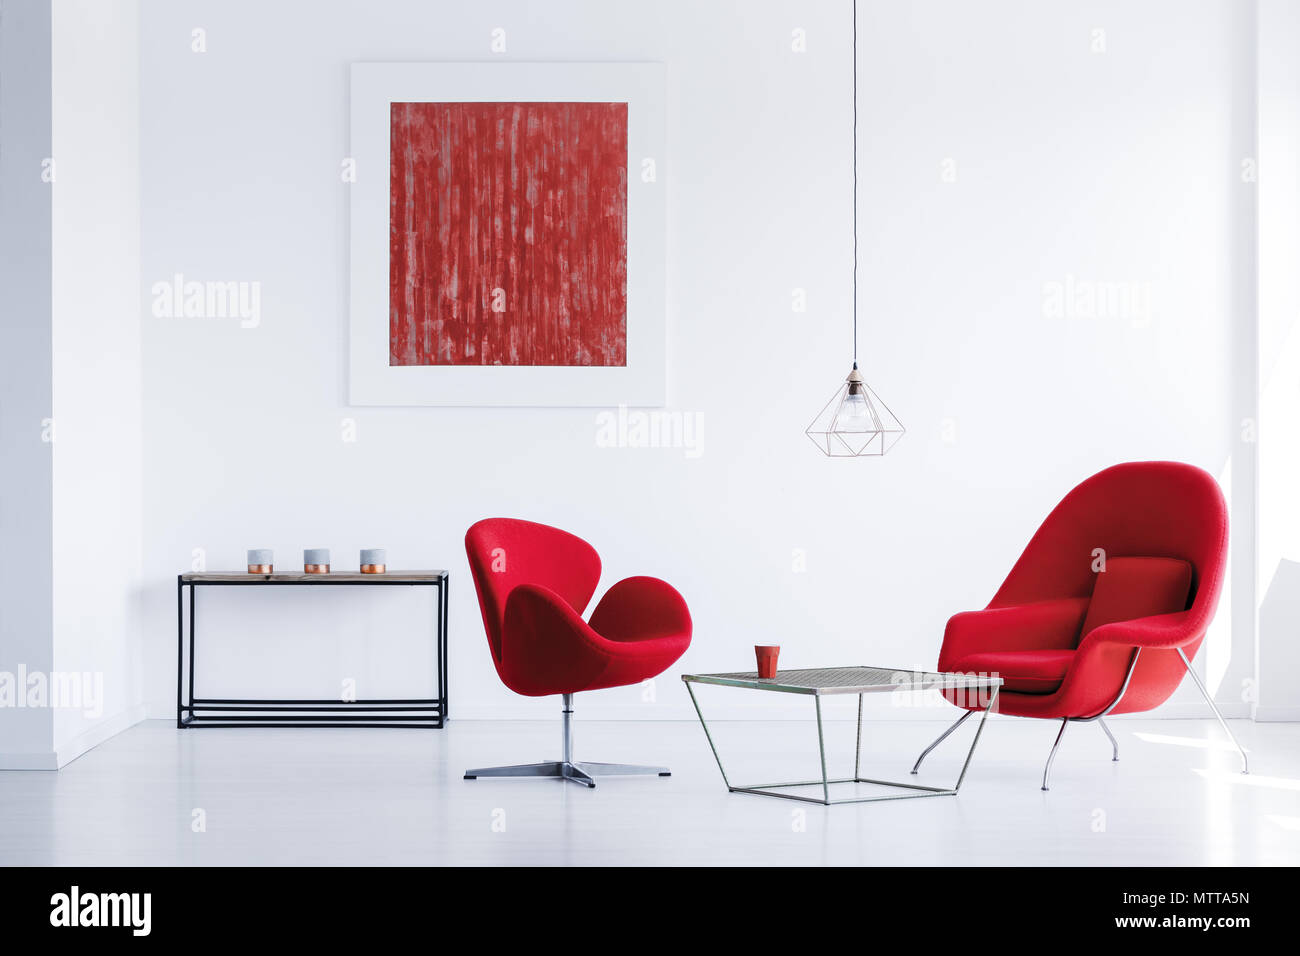 Black metal table with three candles standing in the corner of white room with red armchairs Stock Photo